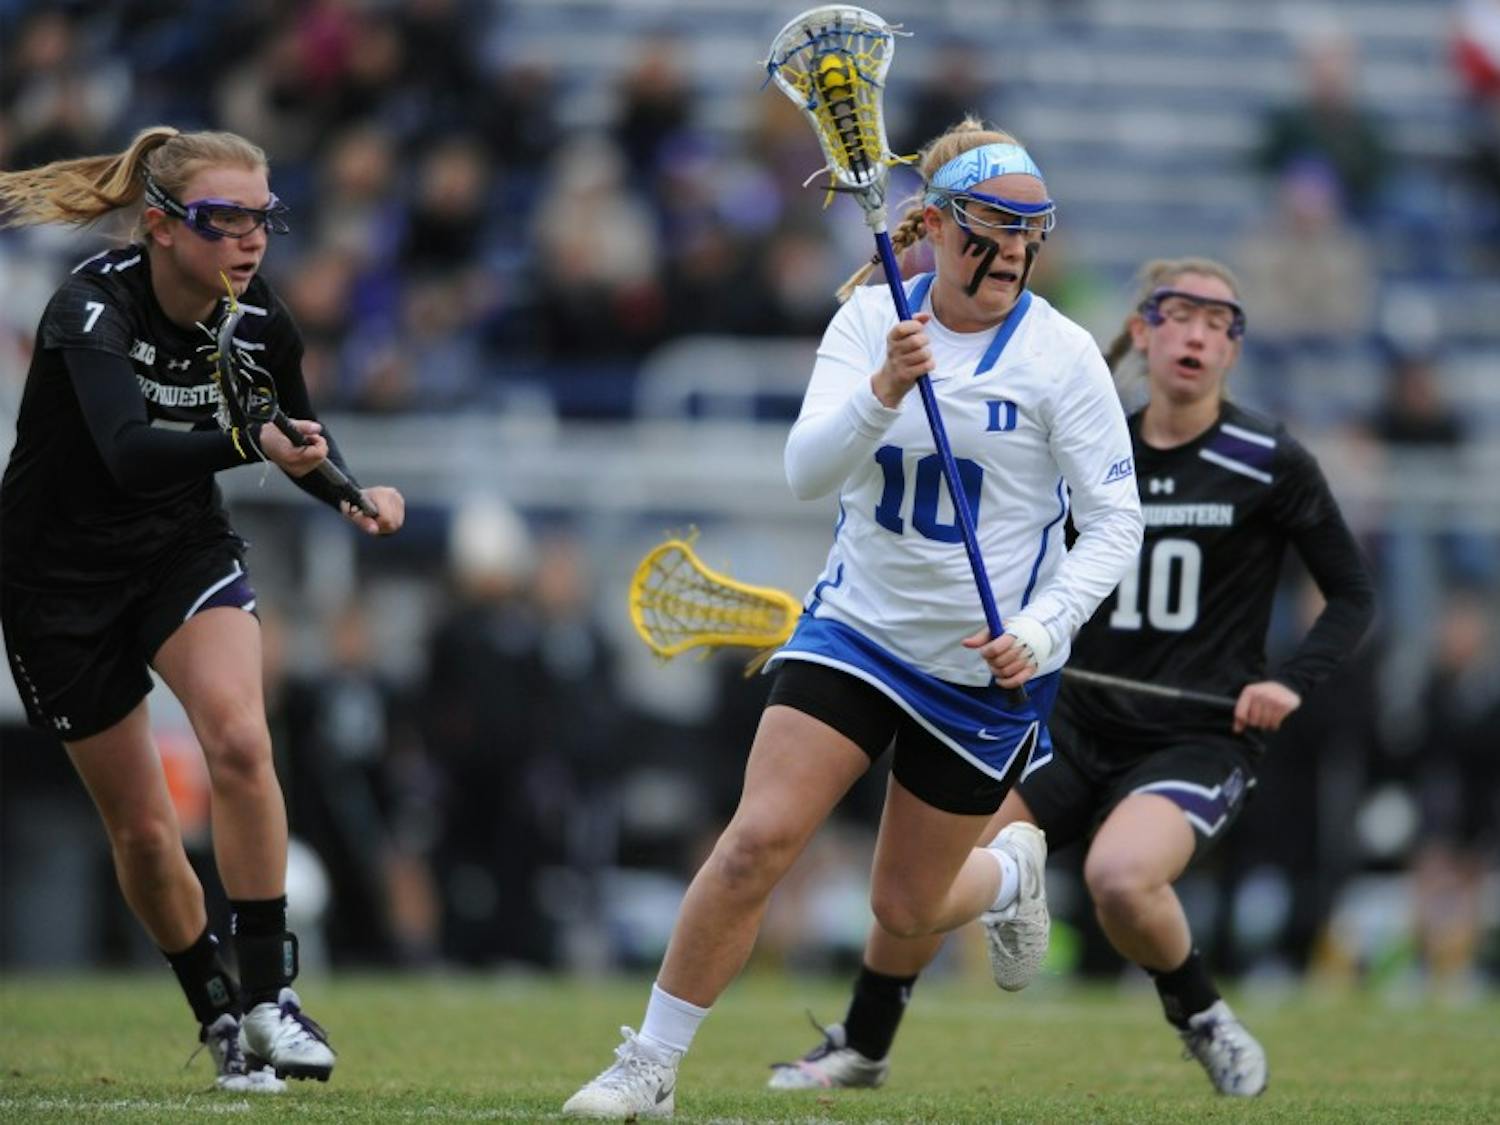 Sophomore Kyra Harney scored two goals Saturday night, but No. 18 Southern California forced the Blue Devils into 14 turnovers and kept Duke scoreless for long stretches in an 11-5 Trojan victory.